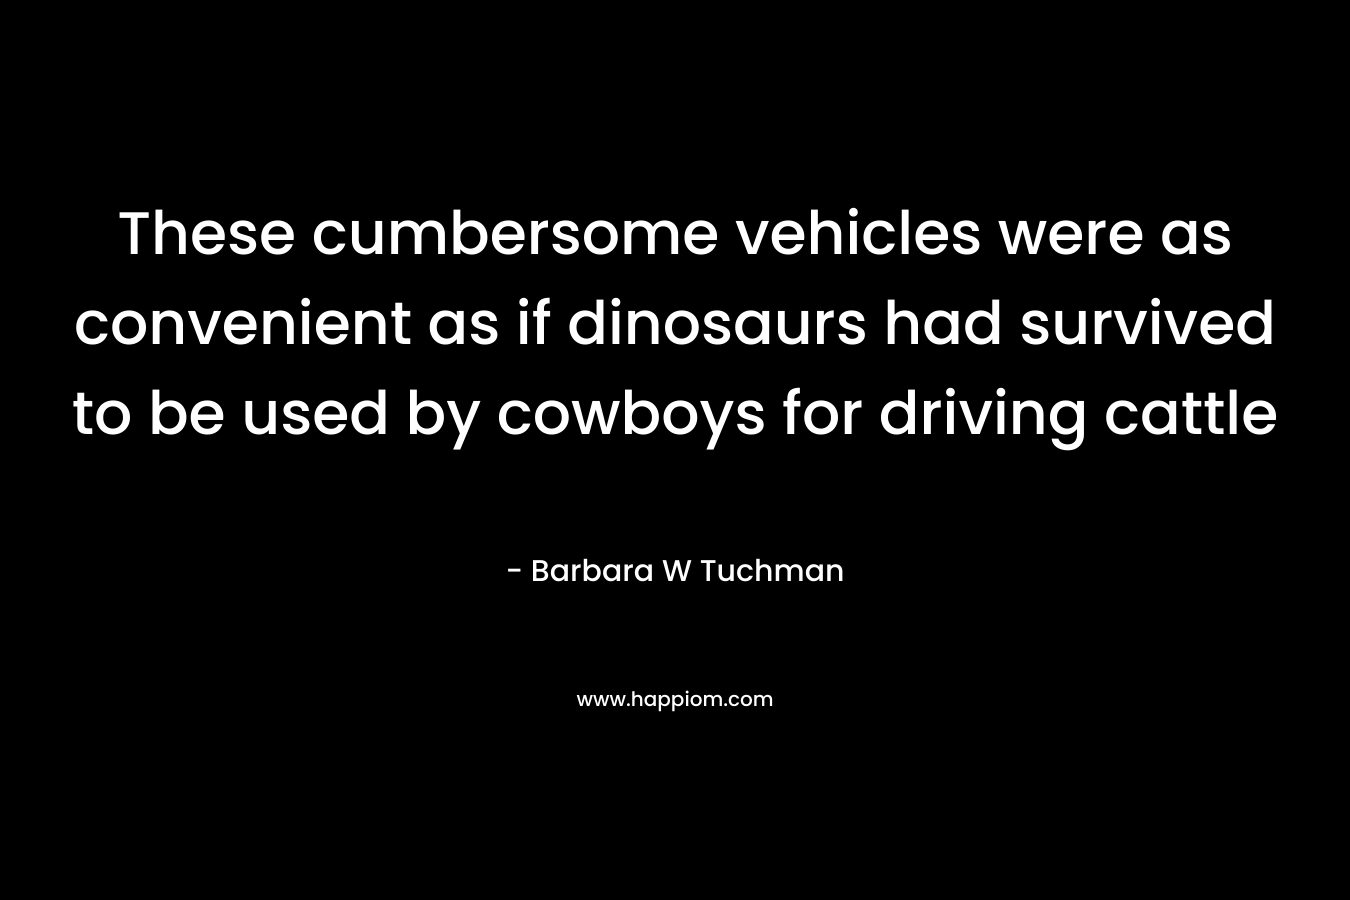 These cumbersome vehicles were as convenient as if dinosaurs had survived to be used by cowboys for driving cattle